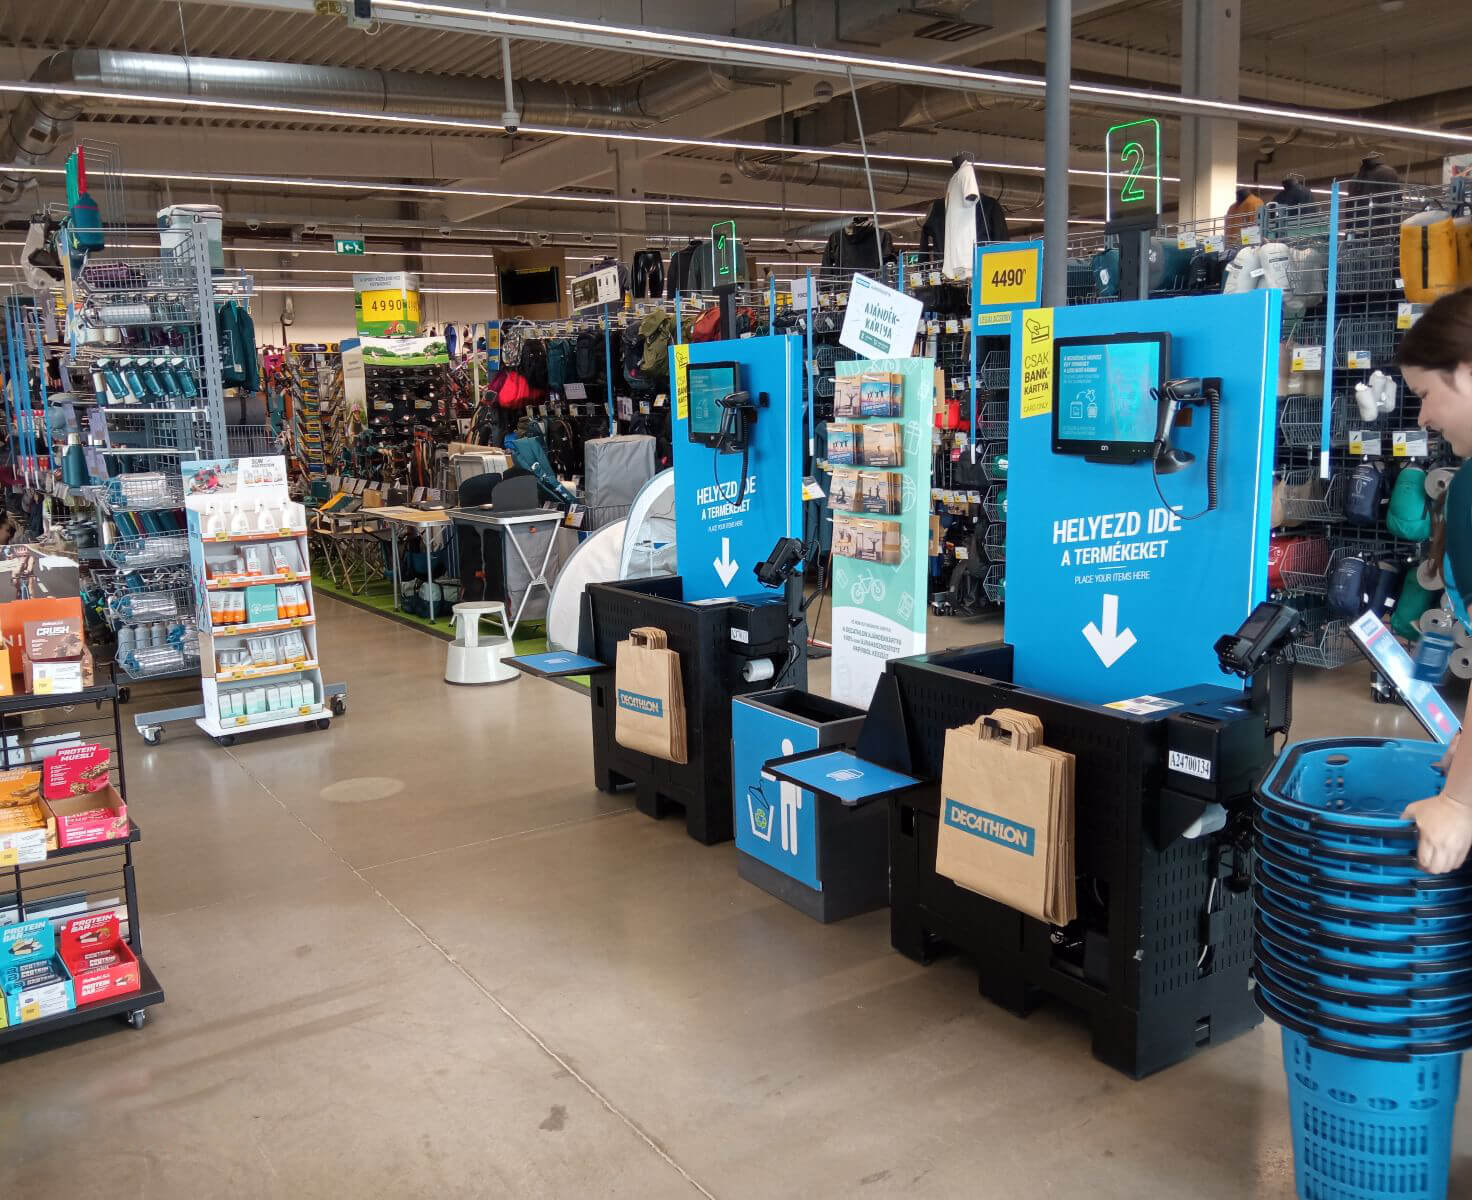 Watch: Unmanned Shops to Be Launched In Hungary This Summer - Video Guide